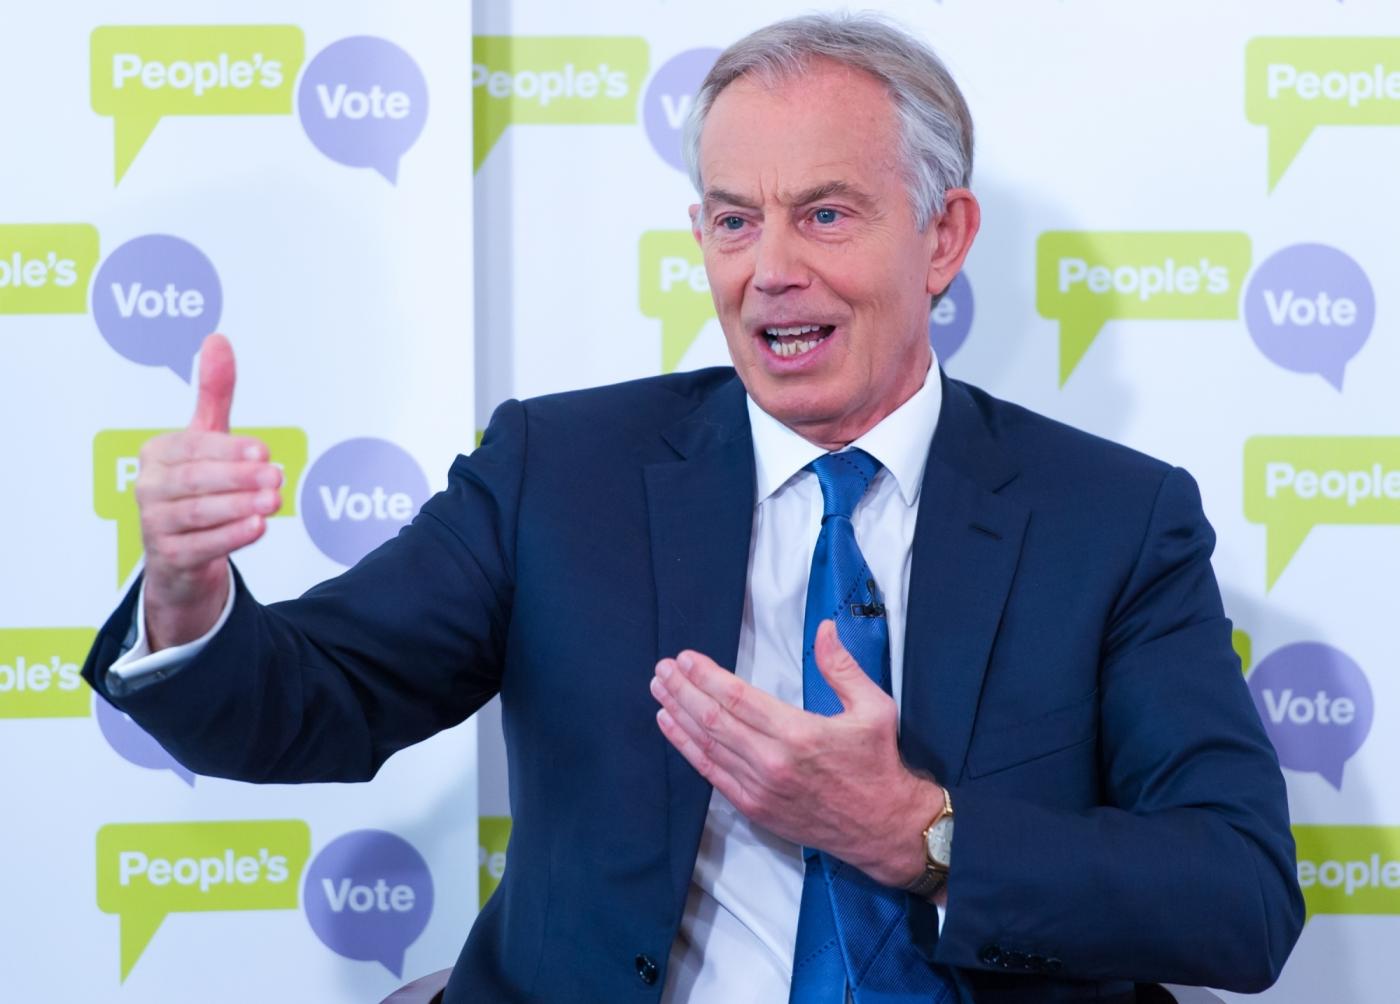 LONDON, Dec. 14, 2018 (Xinhua) -- Former British Prime Minister Tony Blair delivers a speech on Brexit in an event in London, Britain, on Dec. 14, 2018. Tony Blair, a strong supporter of Britain remaining in the EU, said in a speech Friday there would soon be a majority in the British parliament for a second referendum on EU membership. (Xinhua/IANS) by . 